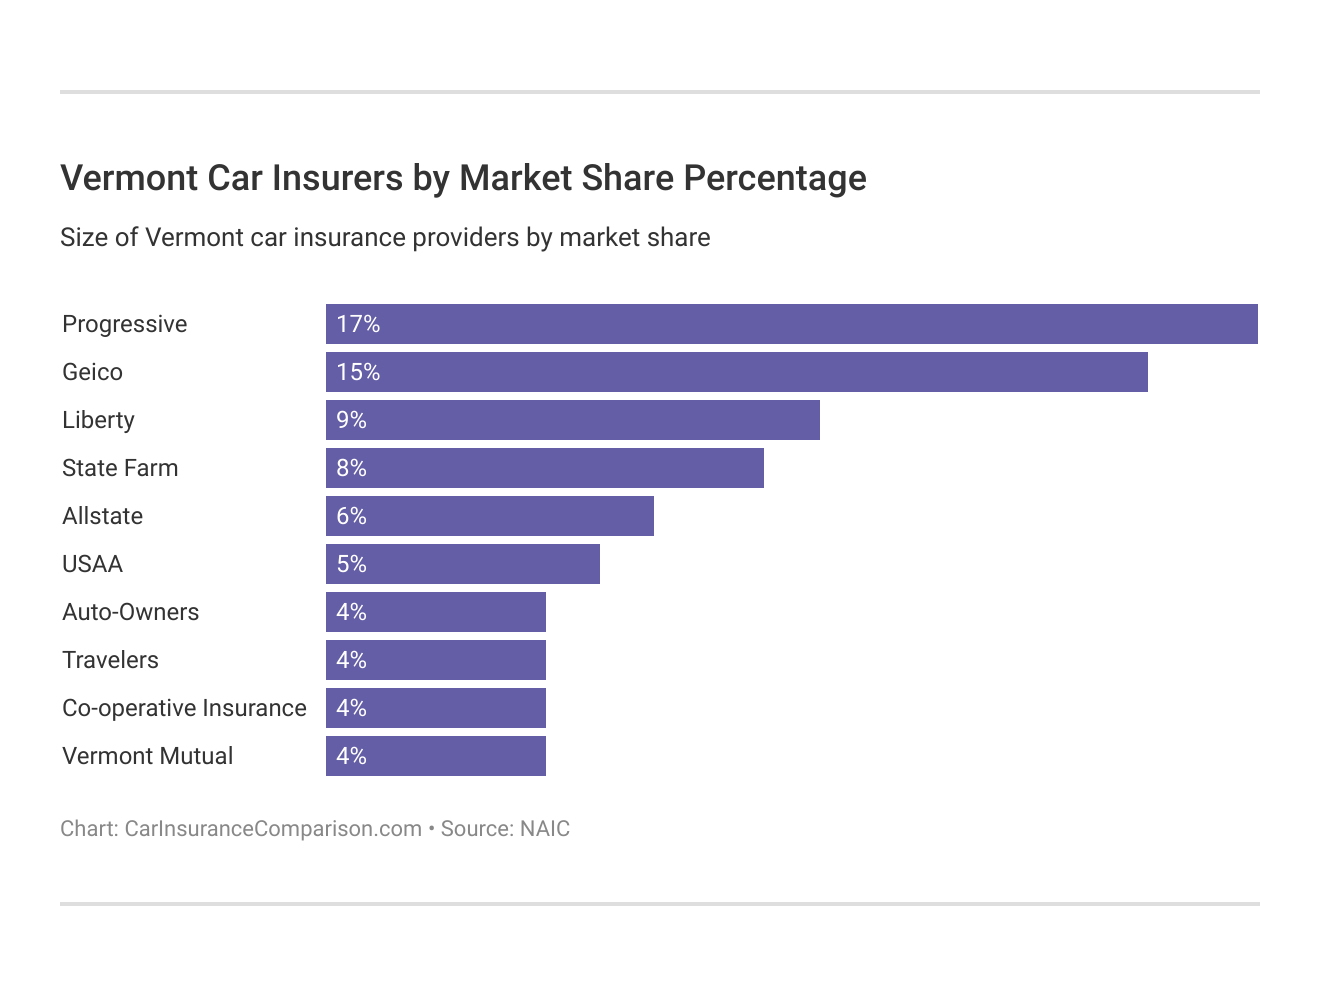 <h3>Vermont Car Insurers by Market Share Percentage</h3>